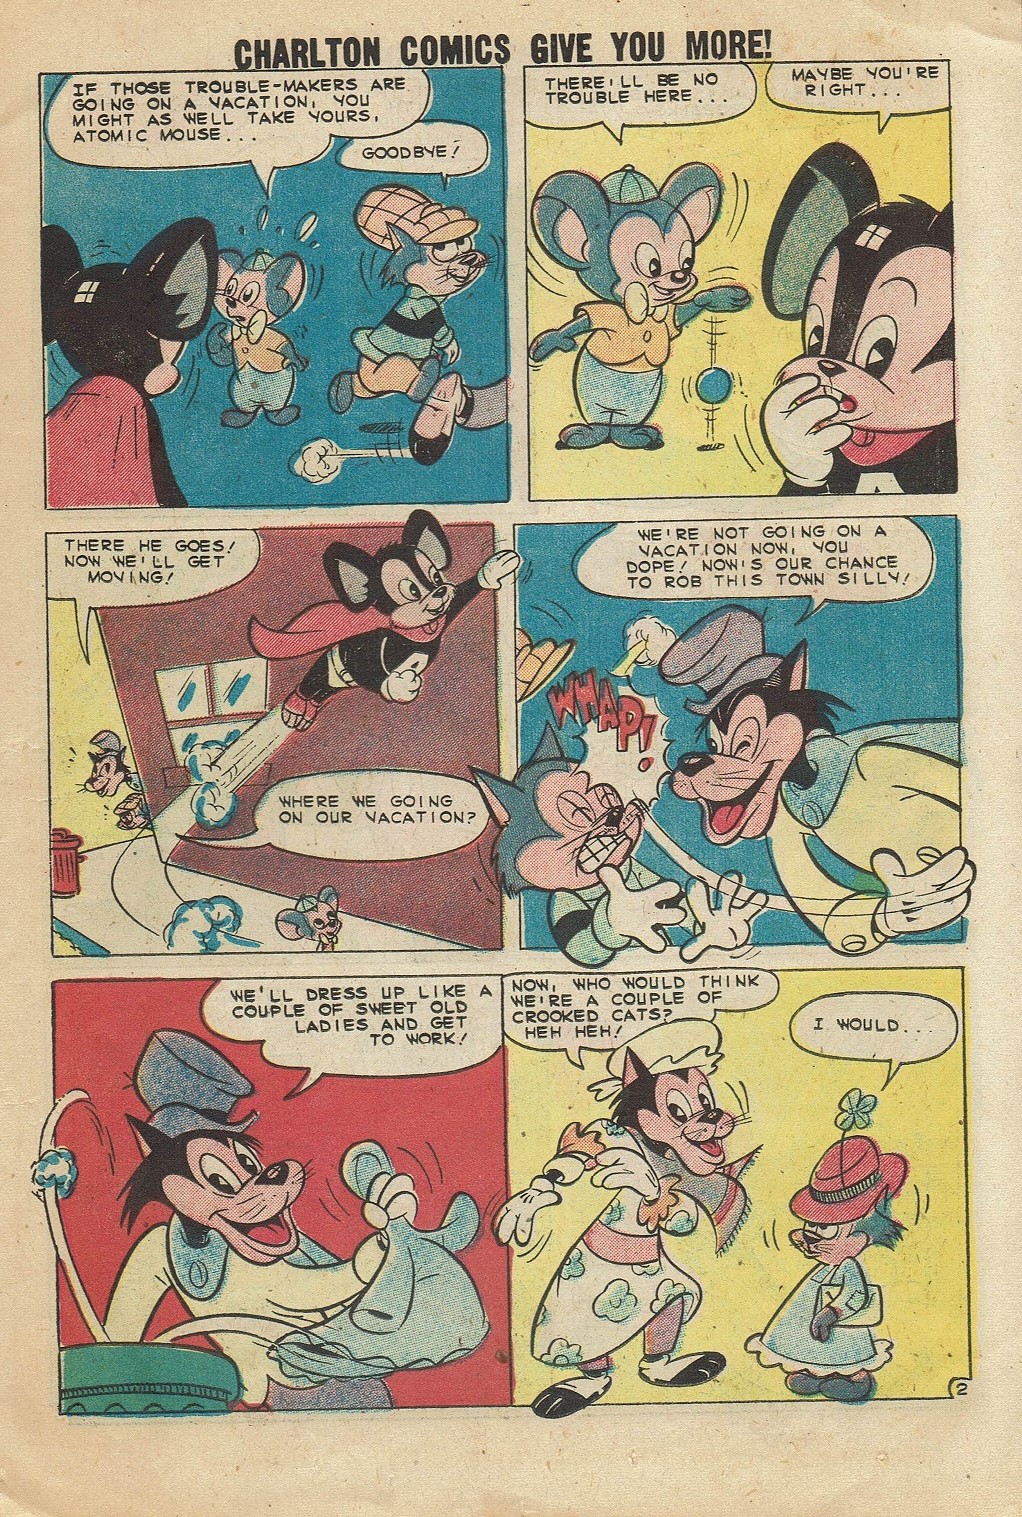 Read online Atomic Mouse comic -  Issue #33 - 11